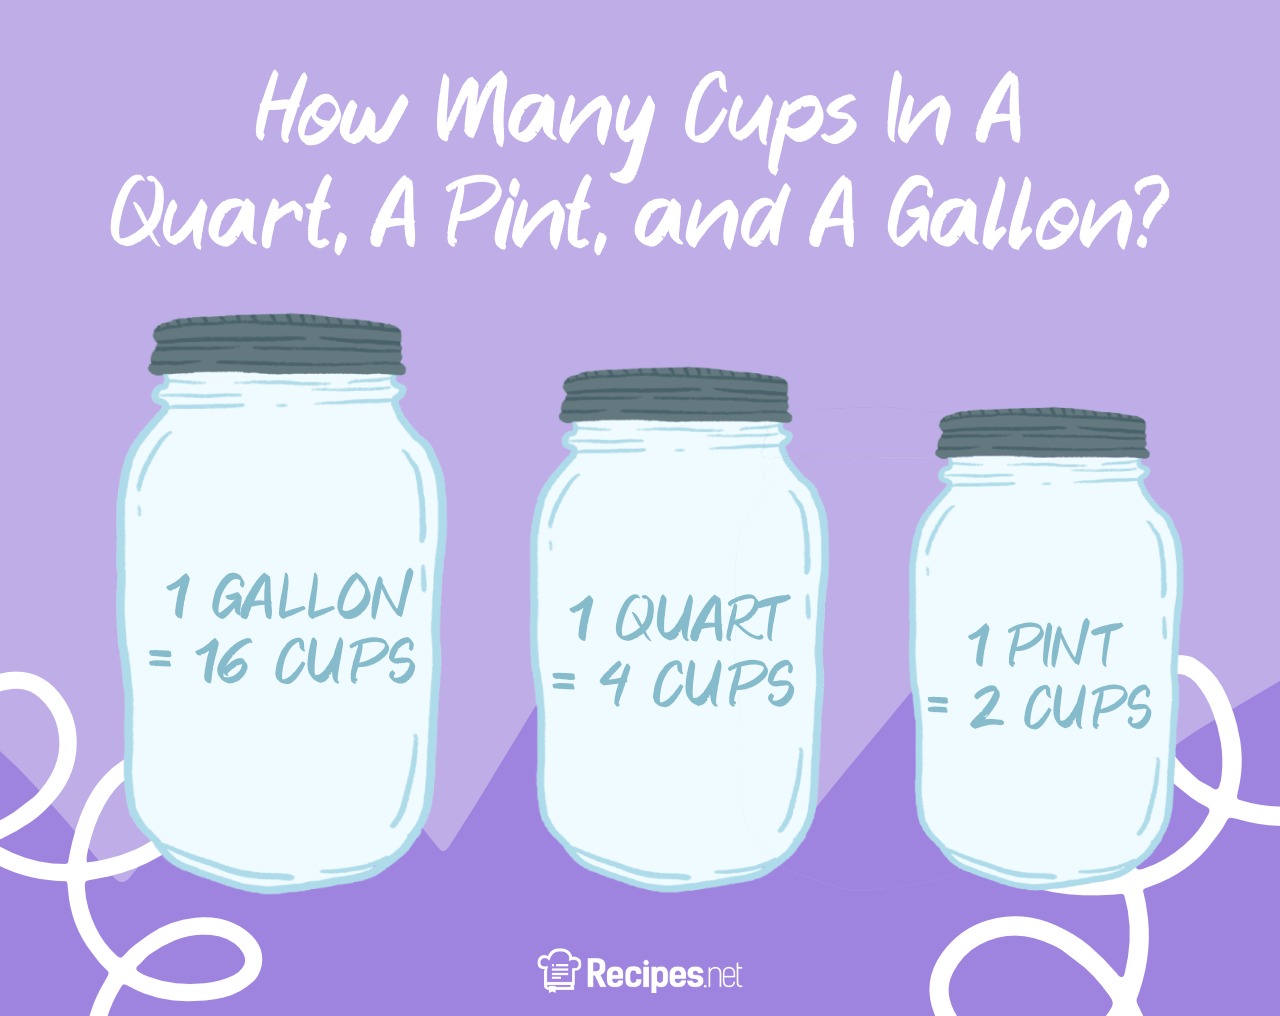 How Many Cups in a Quart - Maebells